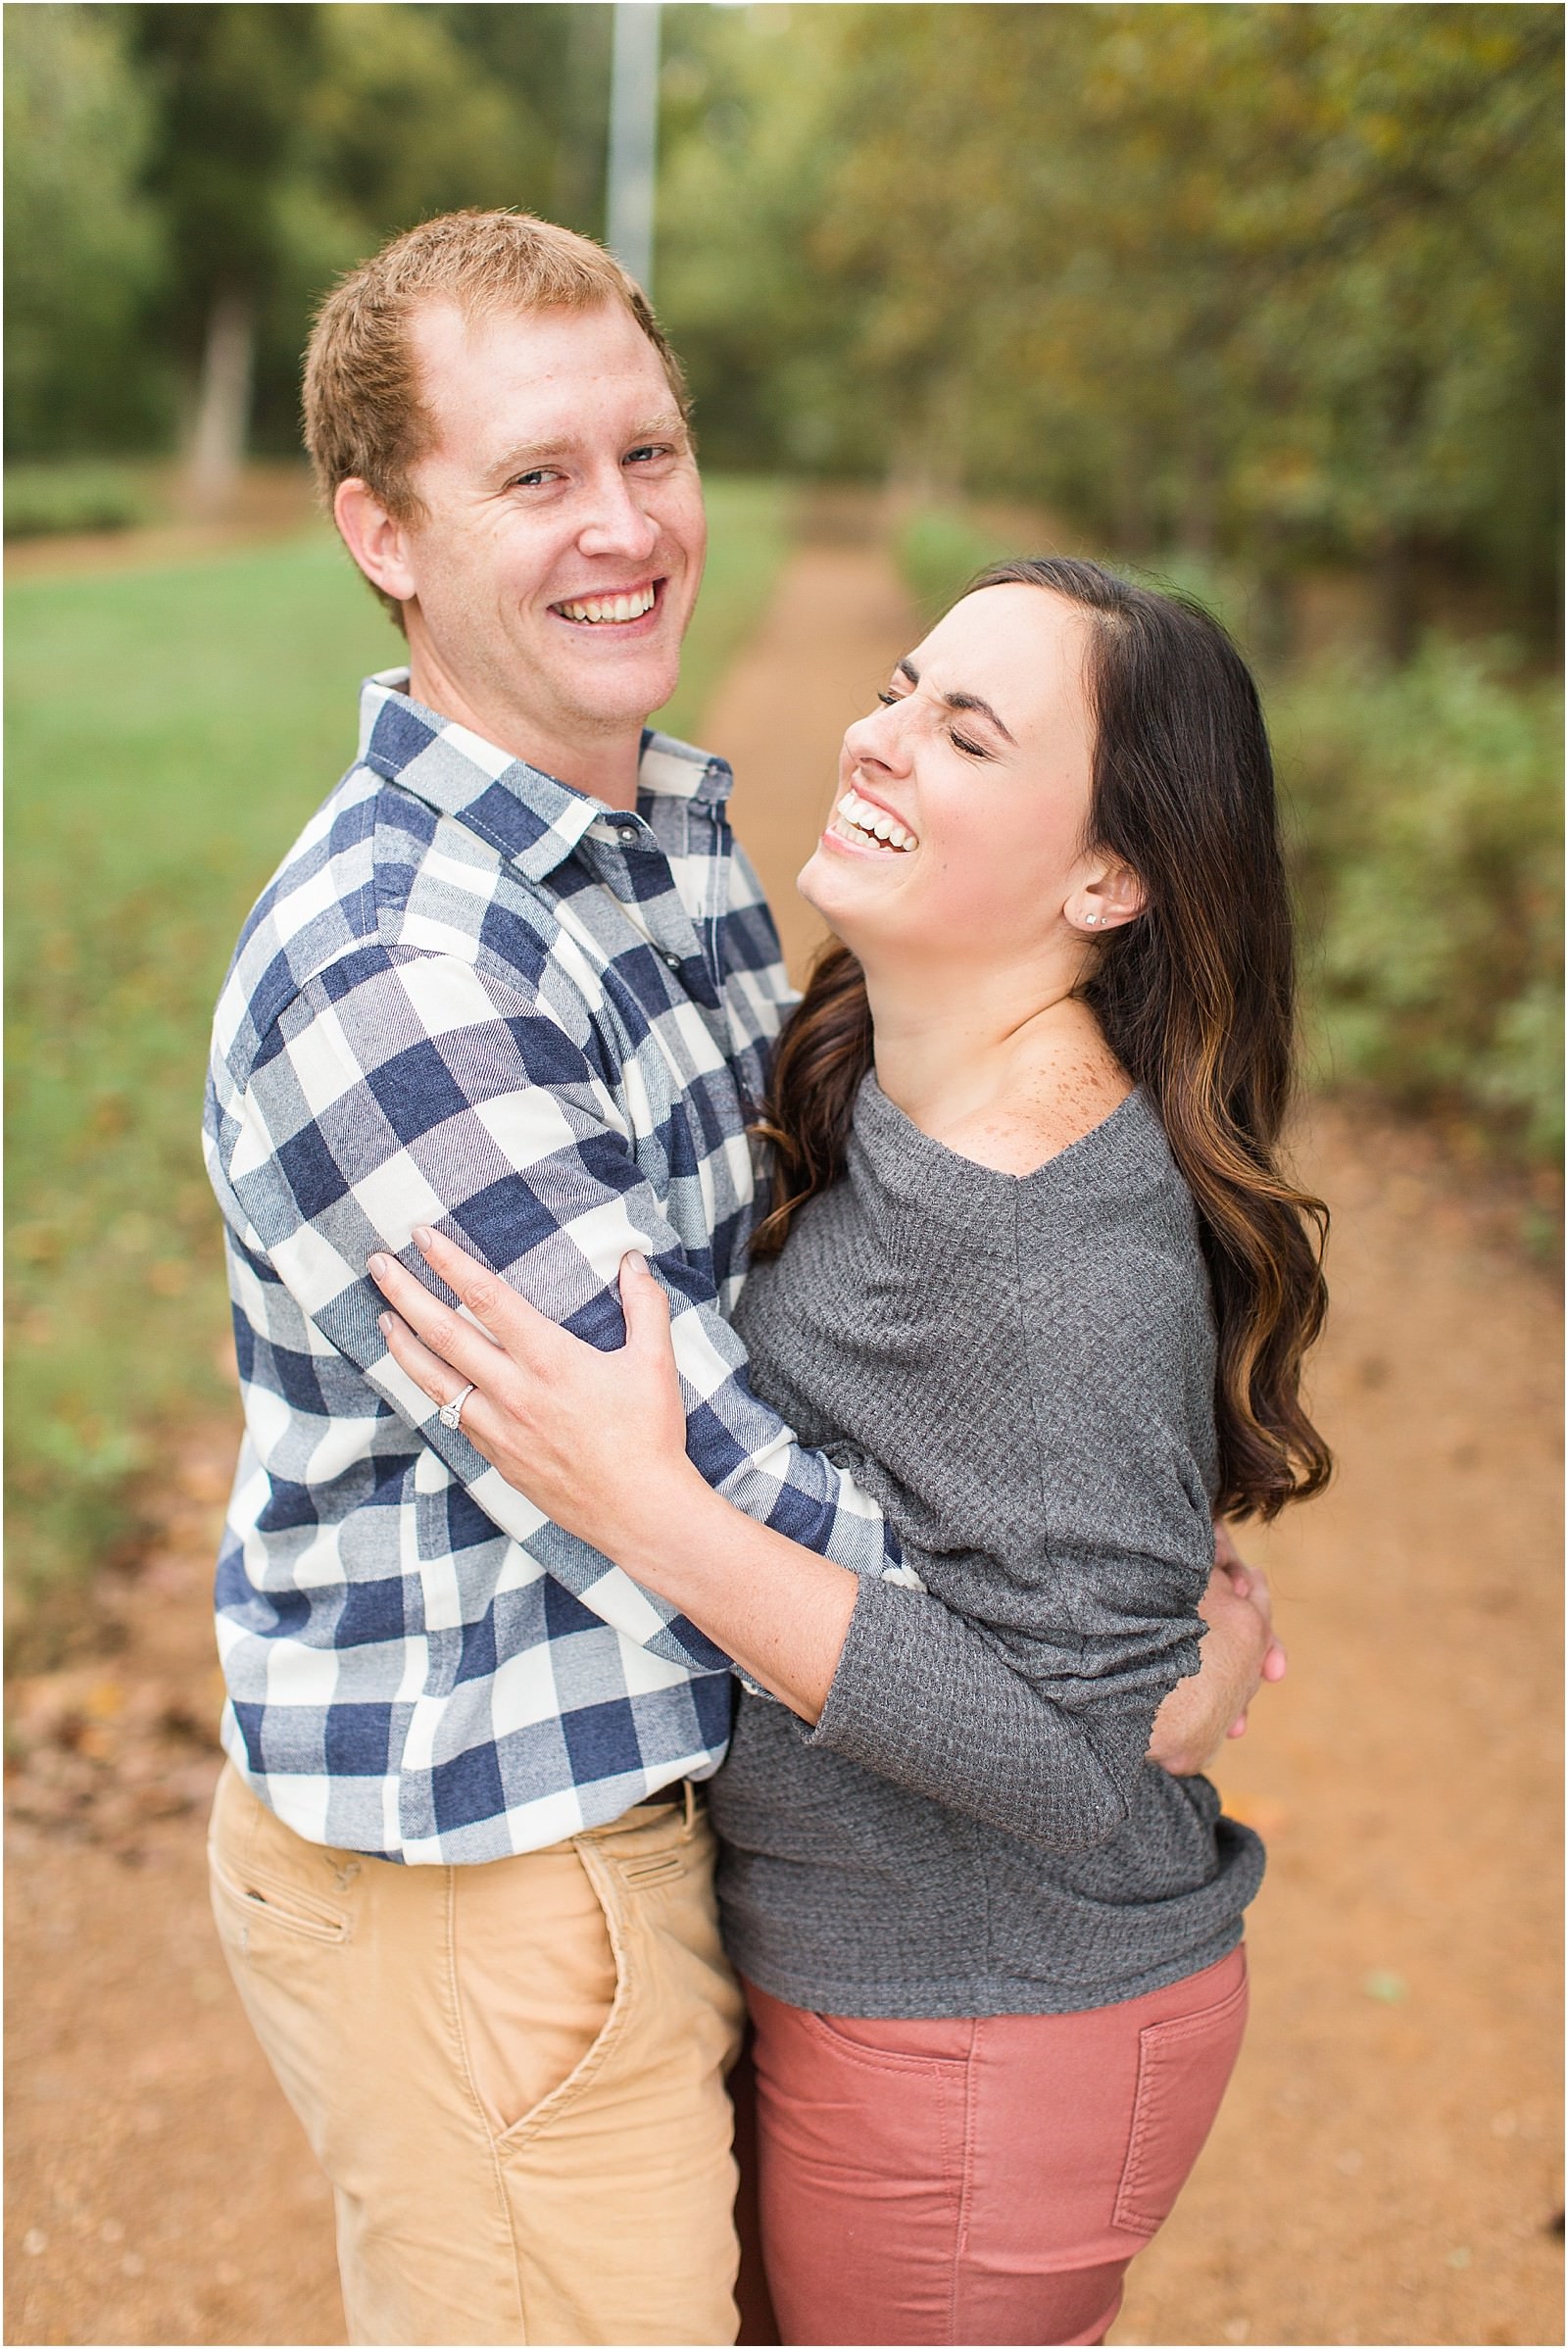 A Lincoln State Park Engagemtent Session | Deidra and Andrew | Bret and Brandie Photography 0003.jpg